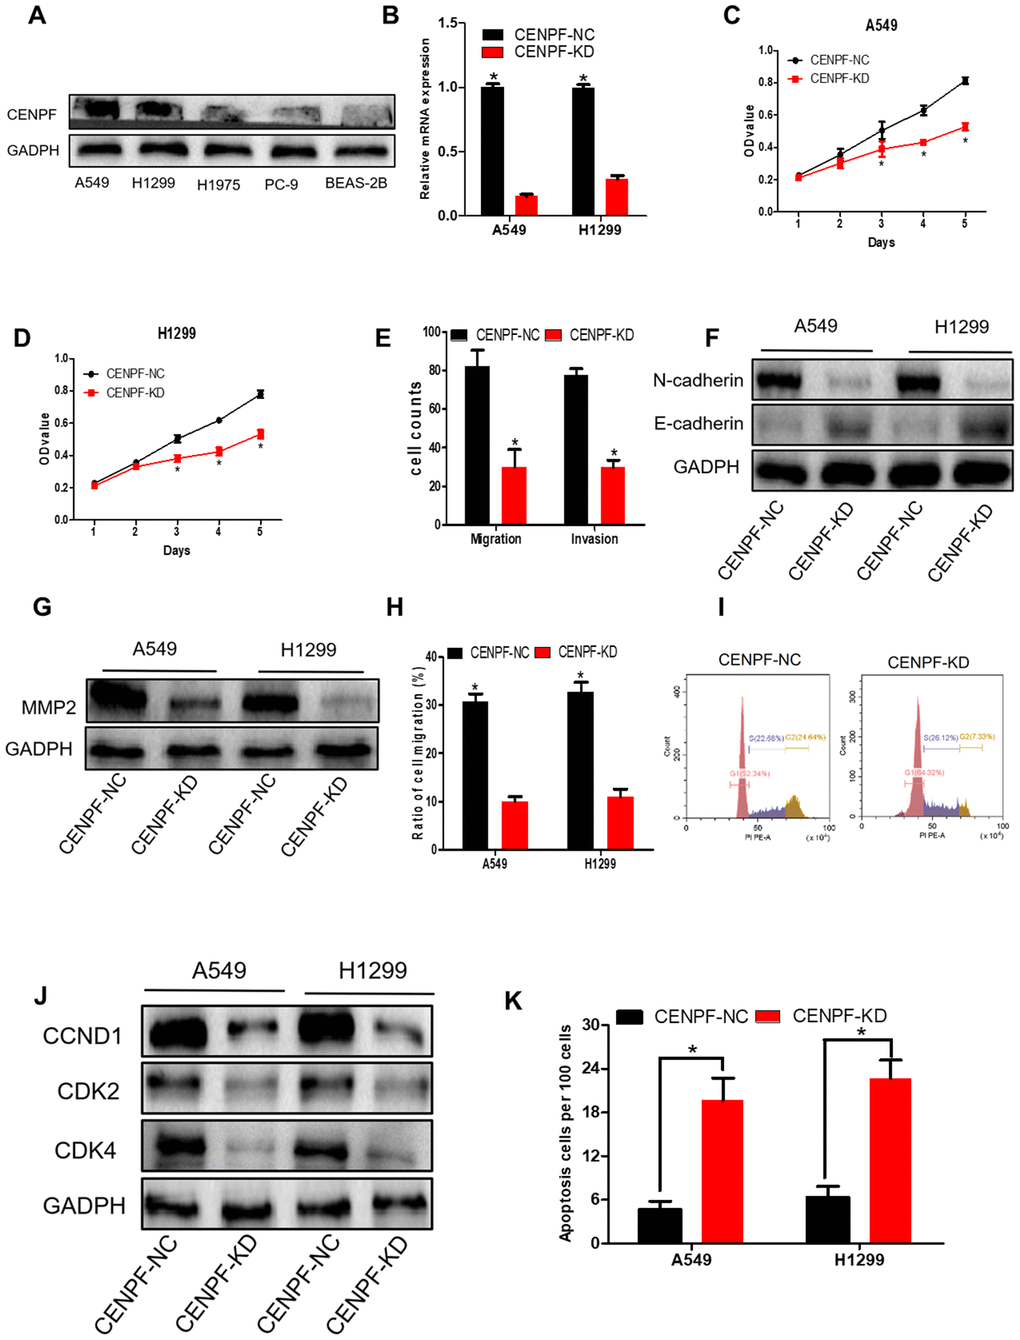 Knockdown of CENPF inhibits cell proliferation, migration, invasion and increases apoptosis of LUAD cells. (A) The protein level of CENPF in A549 and H1299 cell lines were higher than in normal cell lines BEAS-2B and other LUAD cells. GAPDH served as the internal control. (The corresponding gray value are shown in Supplementary Figure 3). (B) The knockdown efficiency of LV-CENPF sh or LV-NC transfected with A549 and H1299 cells was verified by RT-qPCR. *P C, D) MTT showed that CENPF knockdown suppressed the proliferative viability of cells in A549 and H1299 cells. *P E) Migration assays and invasion assays revealed that CENPF-KD decreased cell migration and invasion abilities of A549. (F, G) The related protein E-cadherin was significantly increased (P=0.009, Figure 4F; The corresponding gray value are shown in Supplementary Figure 3G), and N-cadherin and MMP2 were significantly decreased when compared with NC group (P=0.004, 0.012; The corresponding gray value are shown in Supplementary Figure 3H). (H) Quantified histograms of scratch experiment of A549 and H1299. (I) The cell percentage and DNA content were significantly increased in the G1 phase in the CENPF-KD group(P=0.011). (J) The expression of CCND1, CDK2 and CDK4 was significantly lowered in CENPF-KD group (P=0.022, 0.001, 0.002; The corresponding gray value are shown in Supplementary Figure 3M). (K) CENPF knockdown increased apoptosis of A549 and H1299 cell lines (P=0.001, 0.001). Each experiment was performed in triplicate and repeated three times. P values were calculated with two-tailed unpaired Student’s t test.